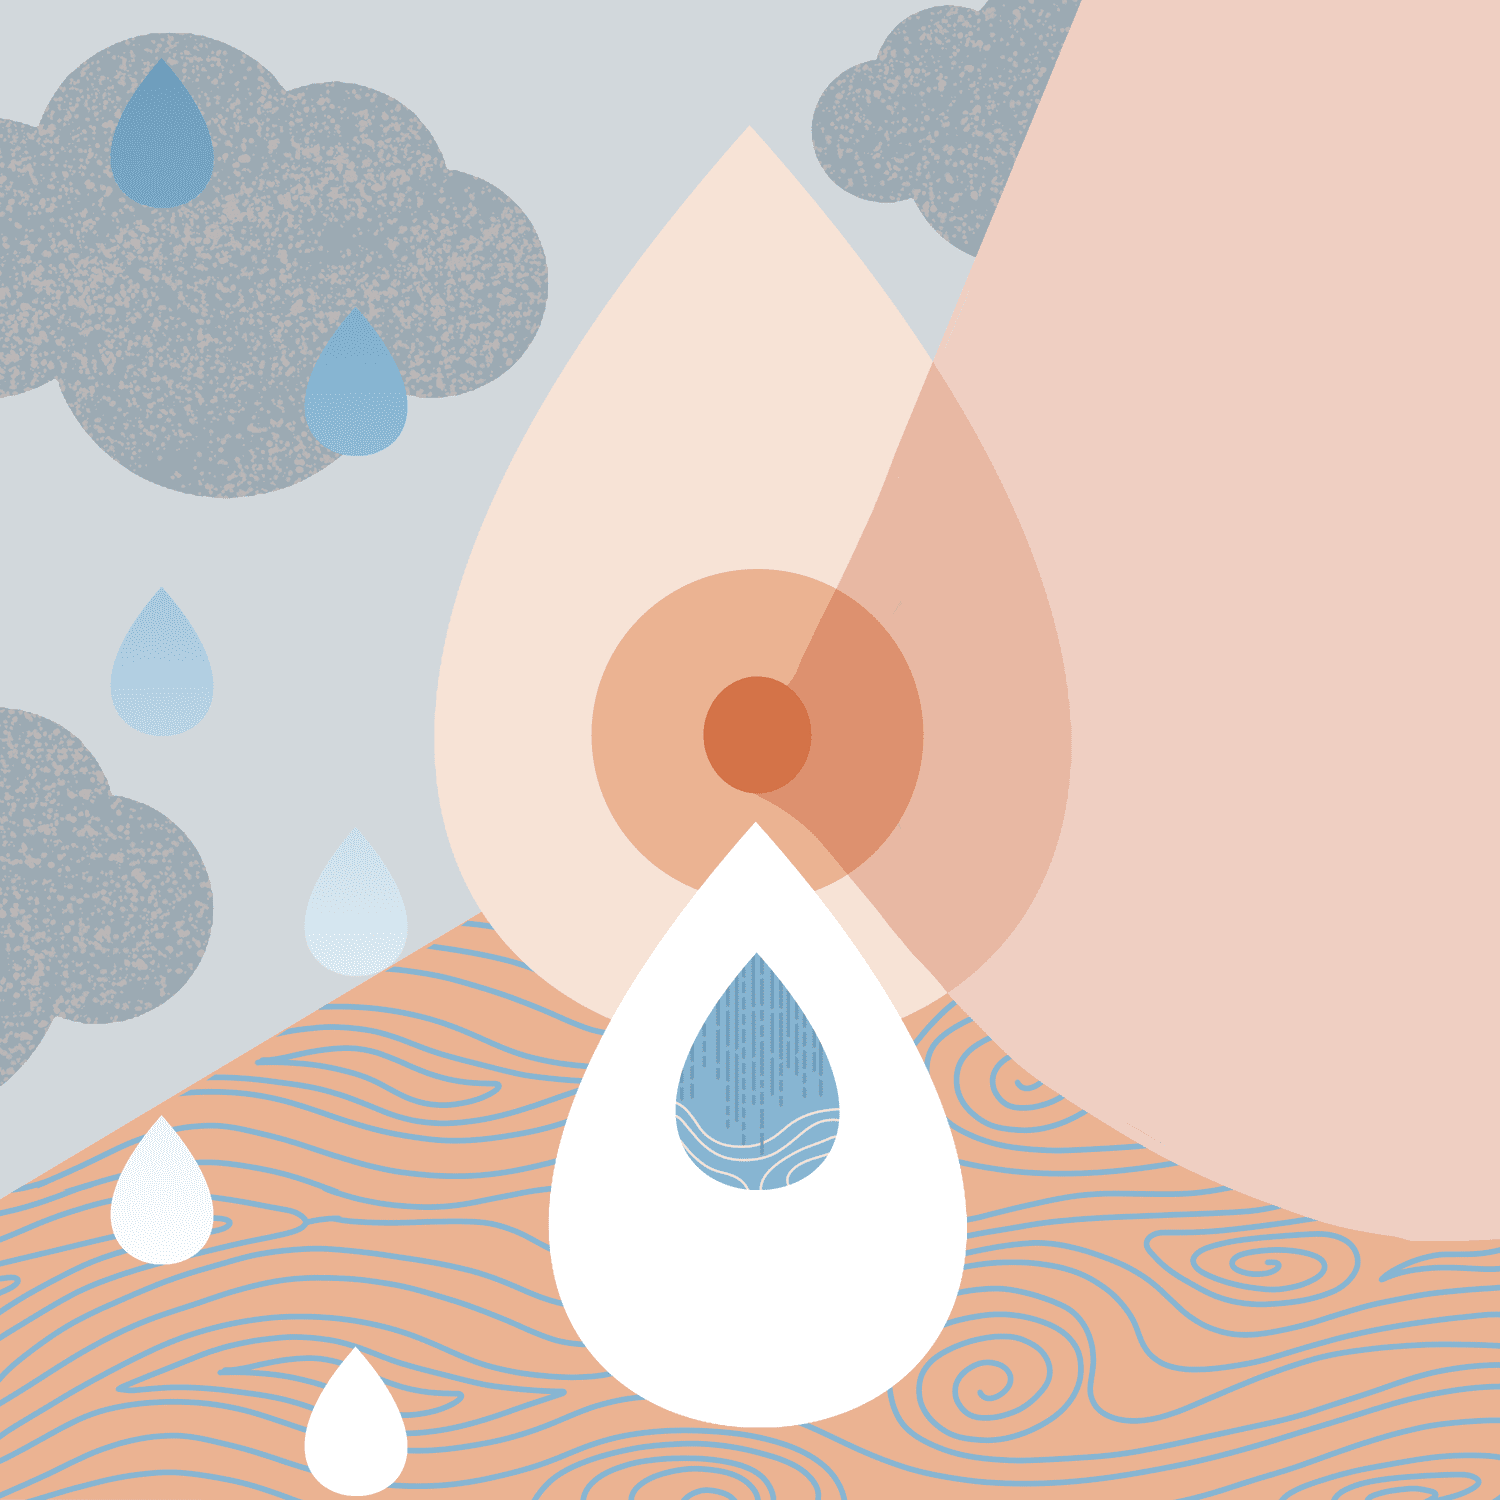 graphic/abstract illustration of breast, milk drops and rain clouds